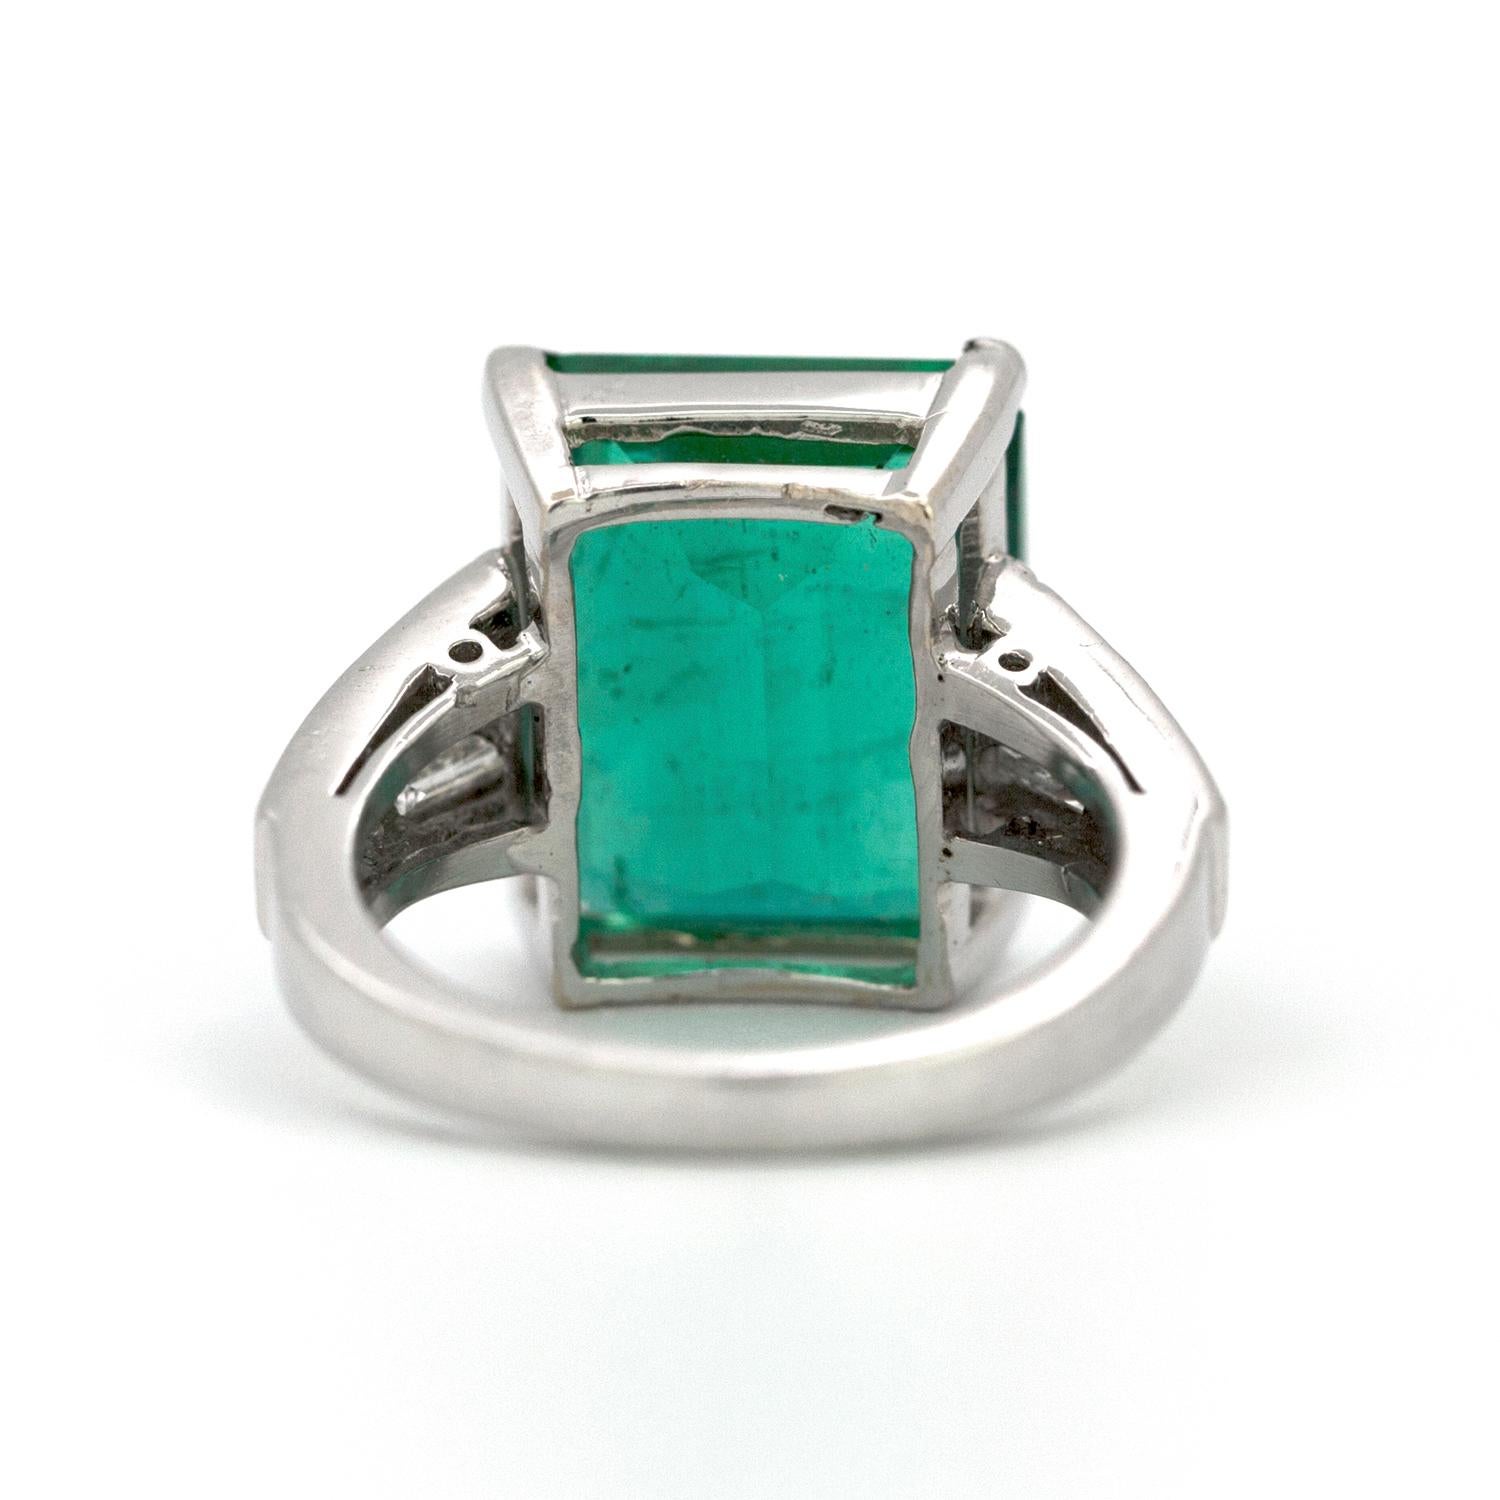 A beautifully crafted platinum ring that features a 10.23 carat Colombian colored natural emerald, set with 6 clean white tapered baguette diamonds that weigh in total 1.50 carats.      